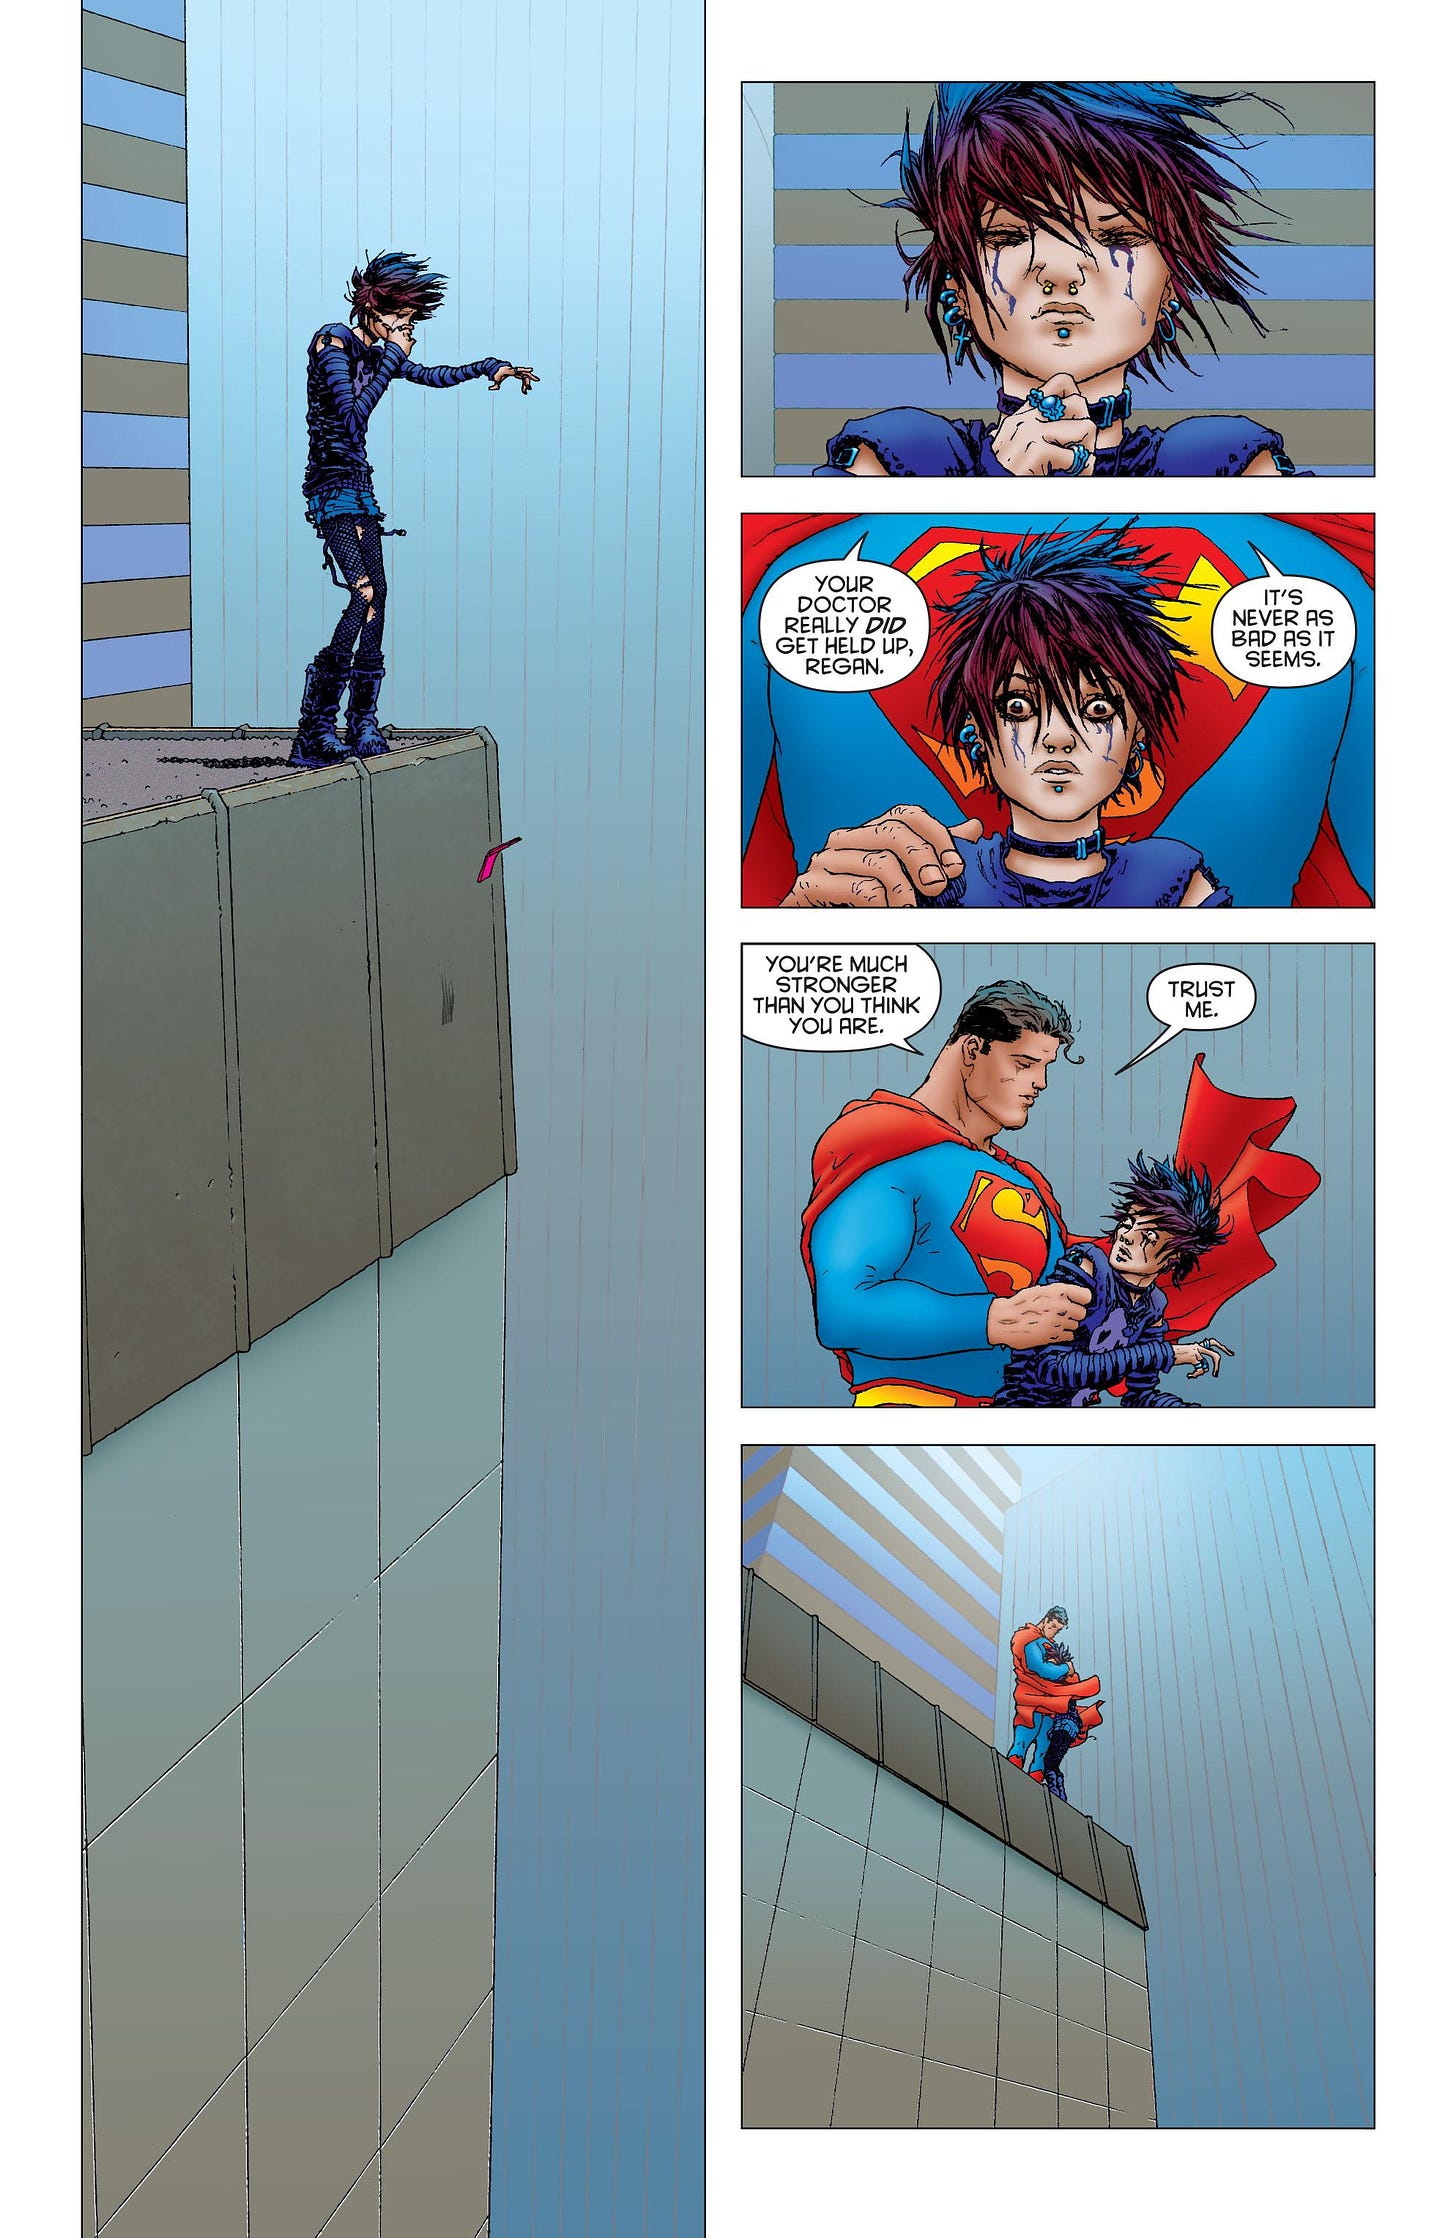 Page from All-Star Superman: Superman lands on the ledge of a tall building behind Regan, a teen about to commit suicide. Superman says, "You're much stronger than you think you are. Trust me."